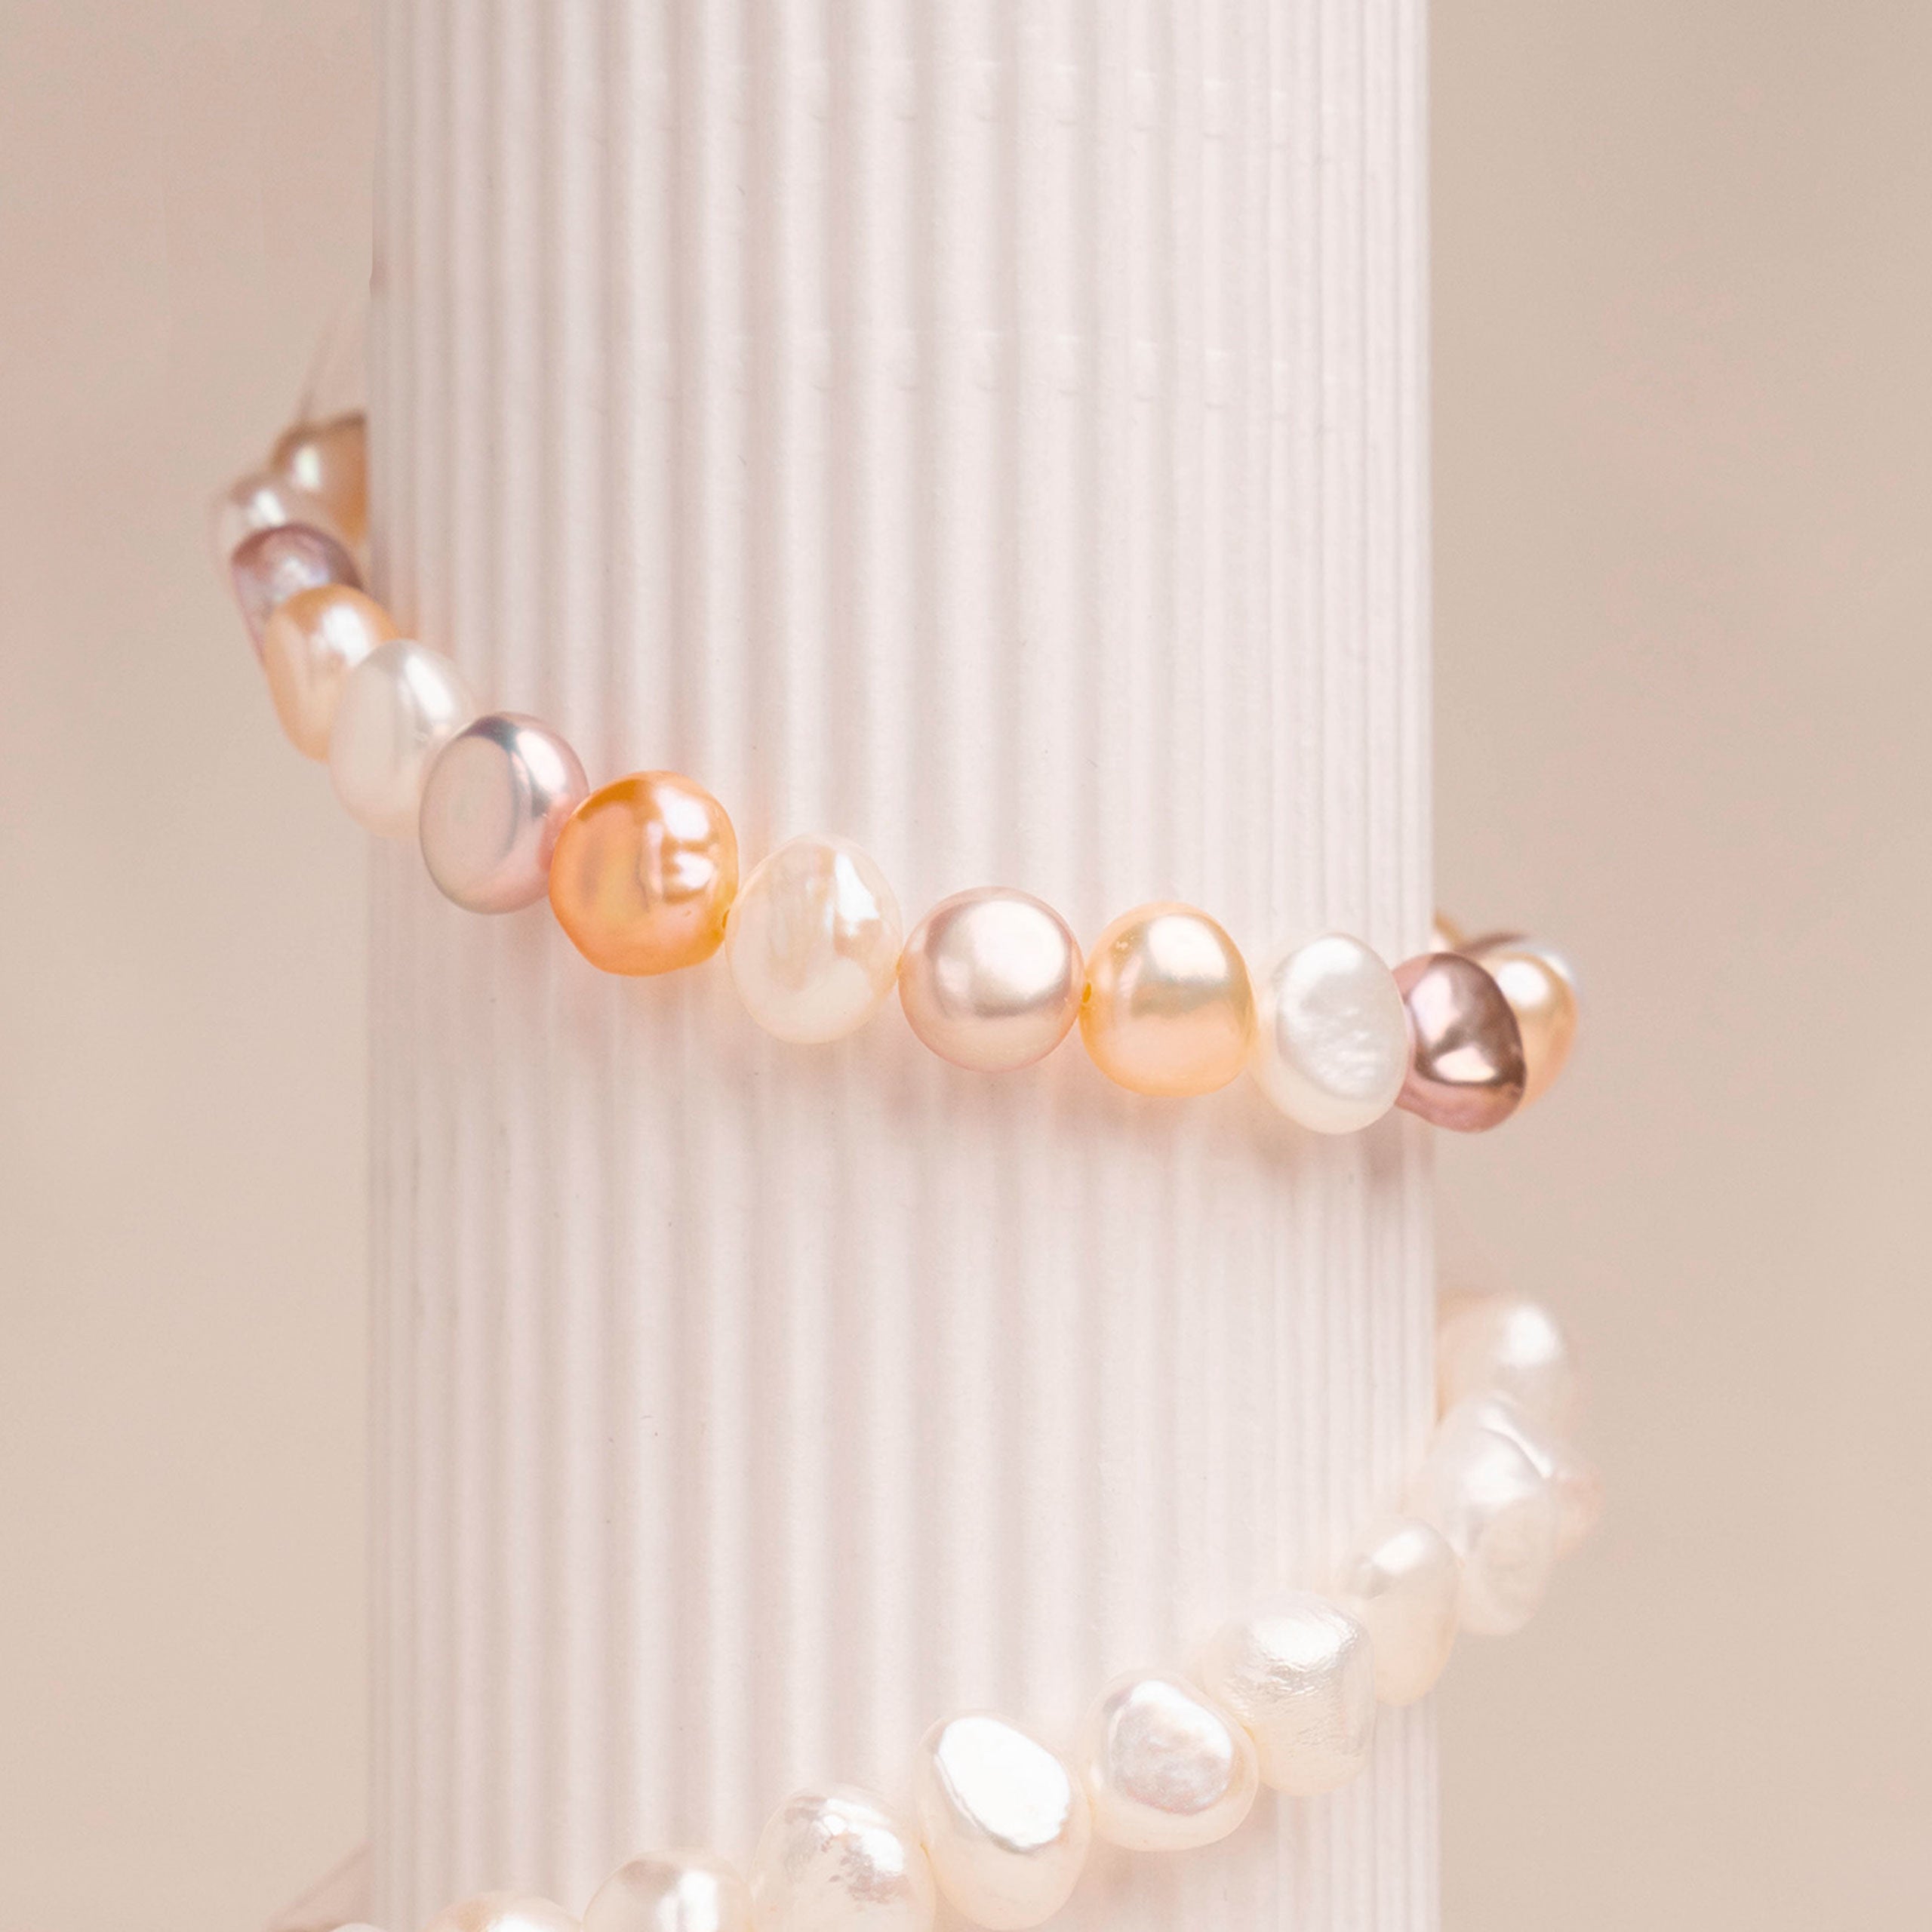 Set of Elastic Bracelets with Baroque Freshwater Pearls in Pink Tones